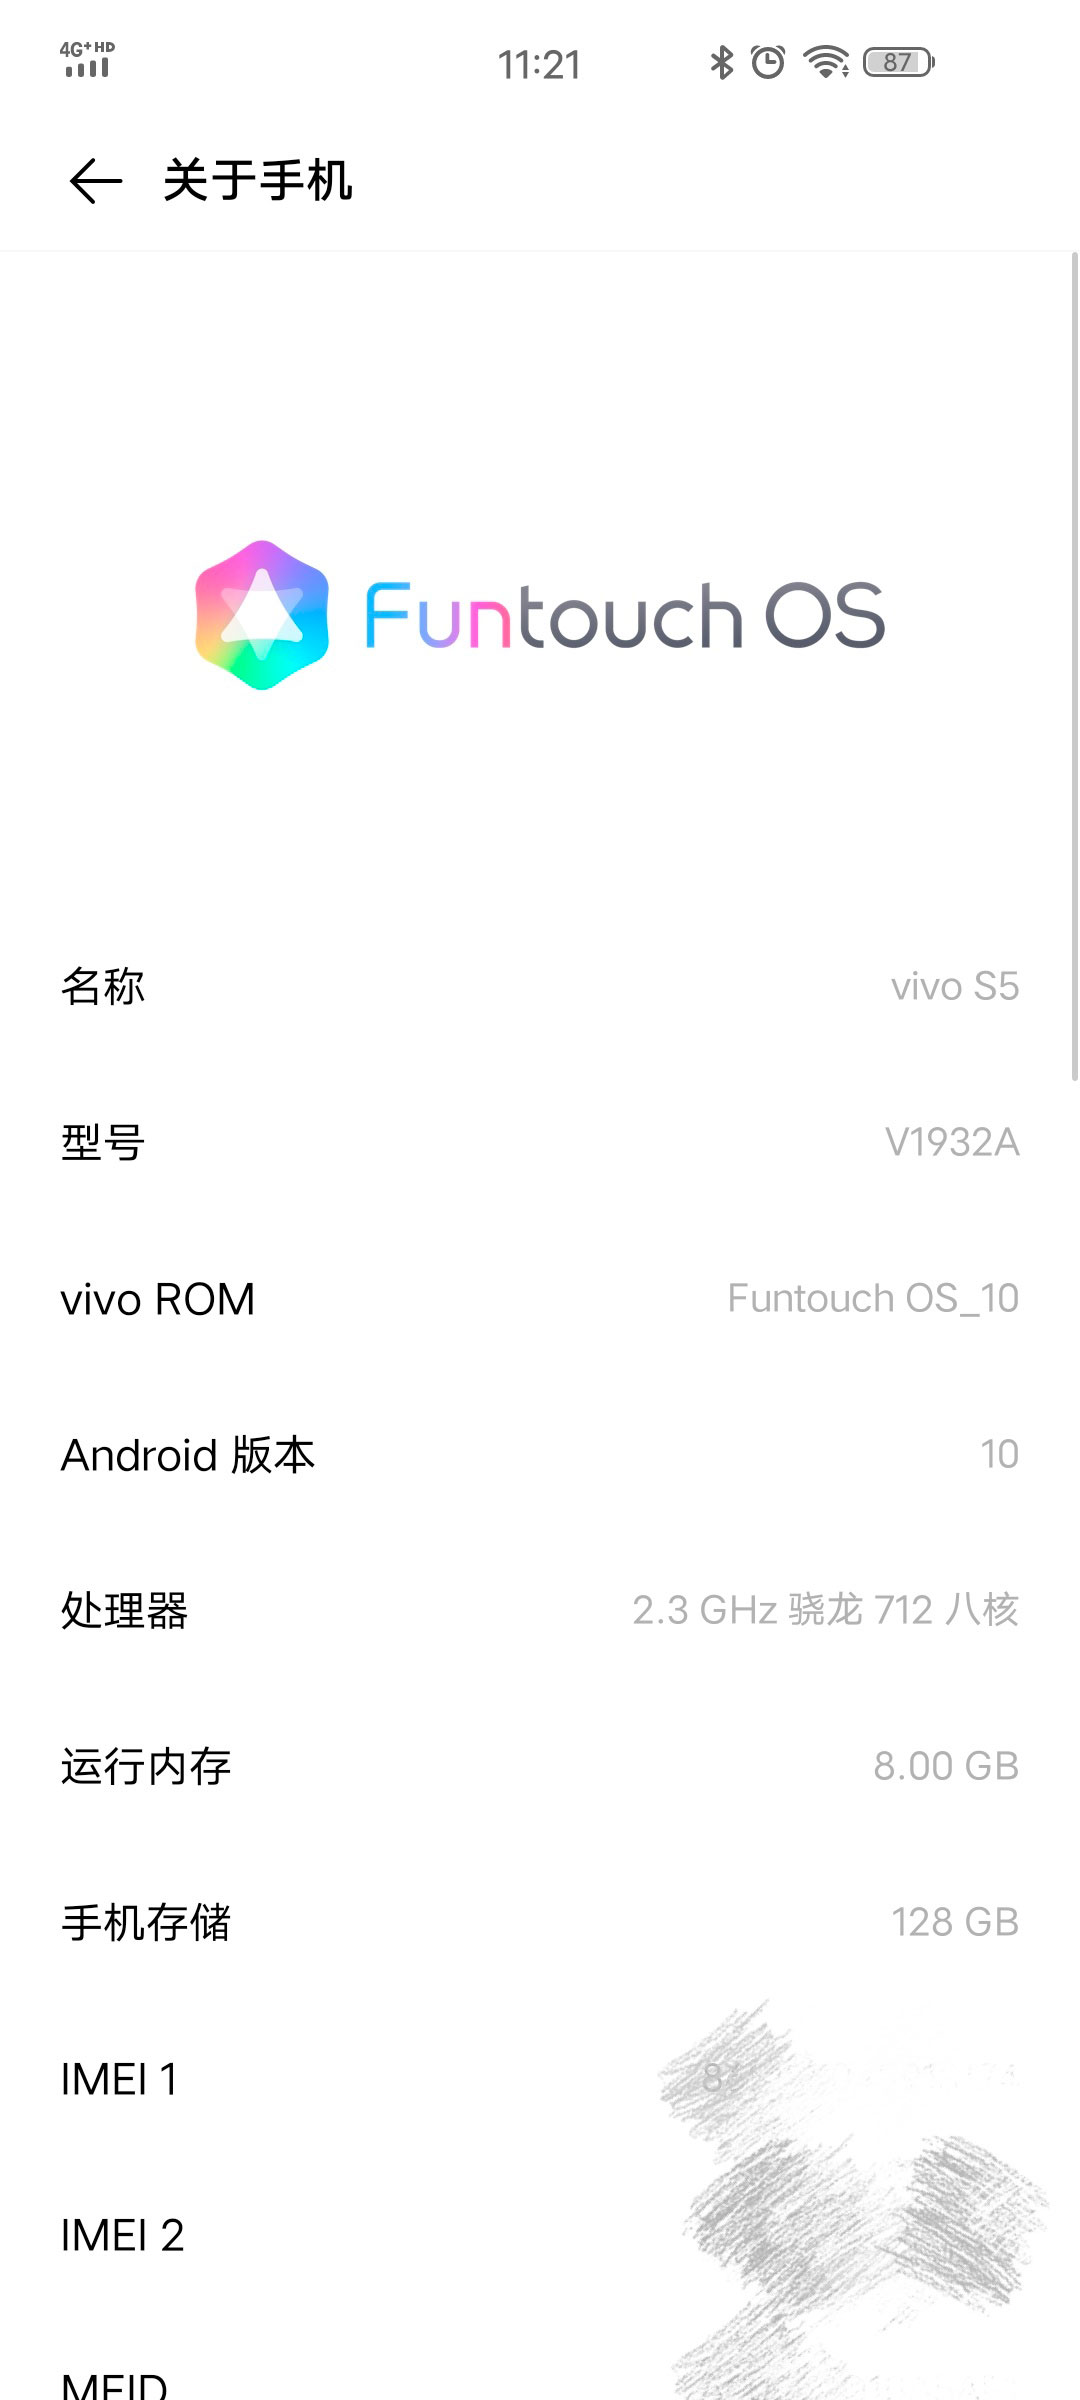 Vivo S5 Android 10 Beta With Funtouch OS 10 Status [Early Adopters Build]